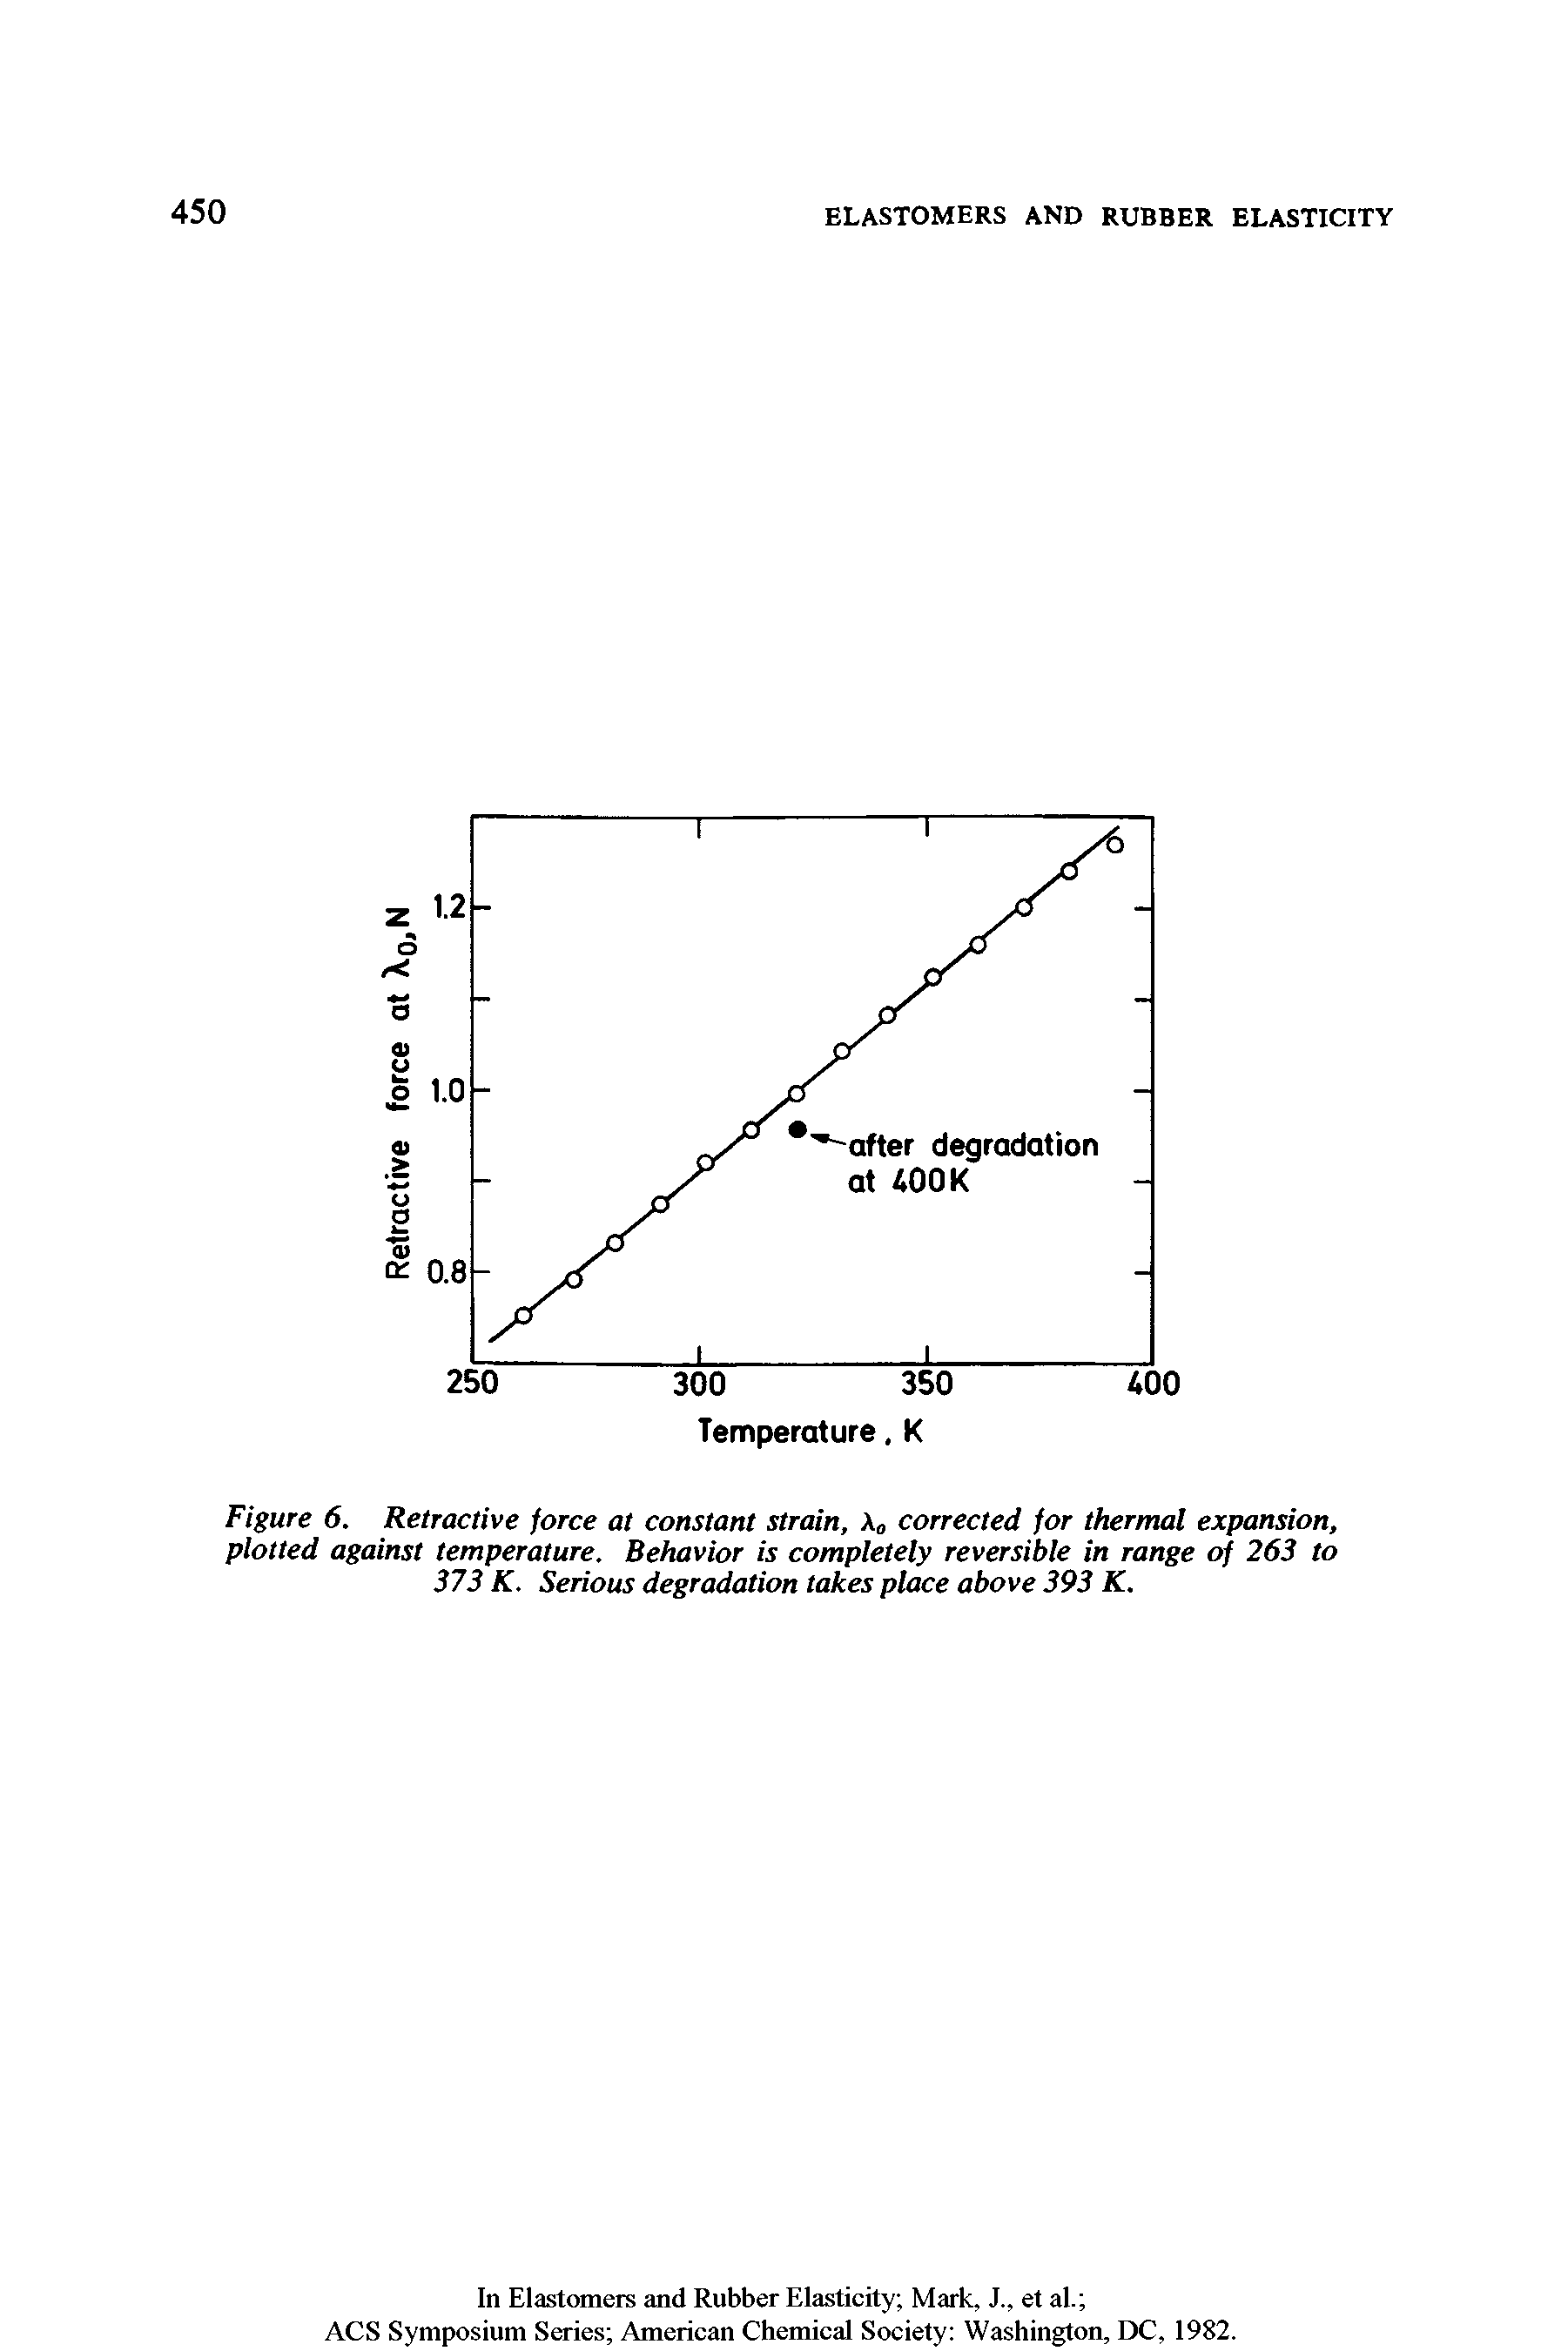 Figure 6. Retractive force at constant strain, A corrected for thermal expansion, plotted against temperature. Behavior is completely reversible in range of 263 to 373 K. Serious degradation takes place above 393 K.